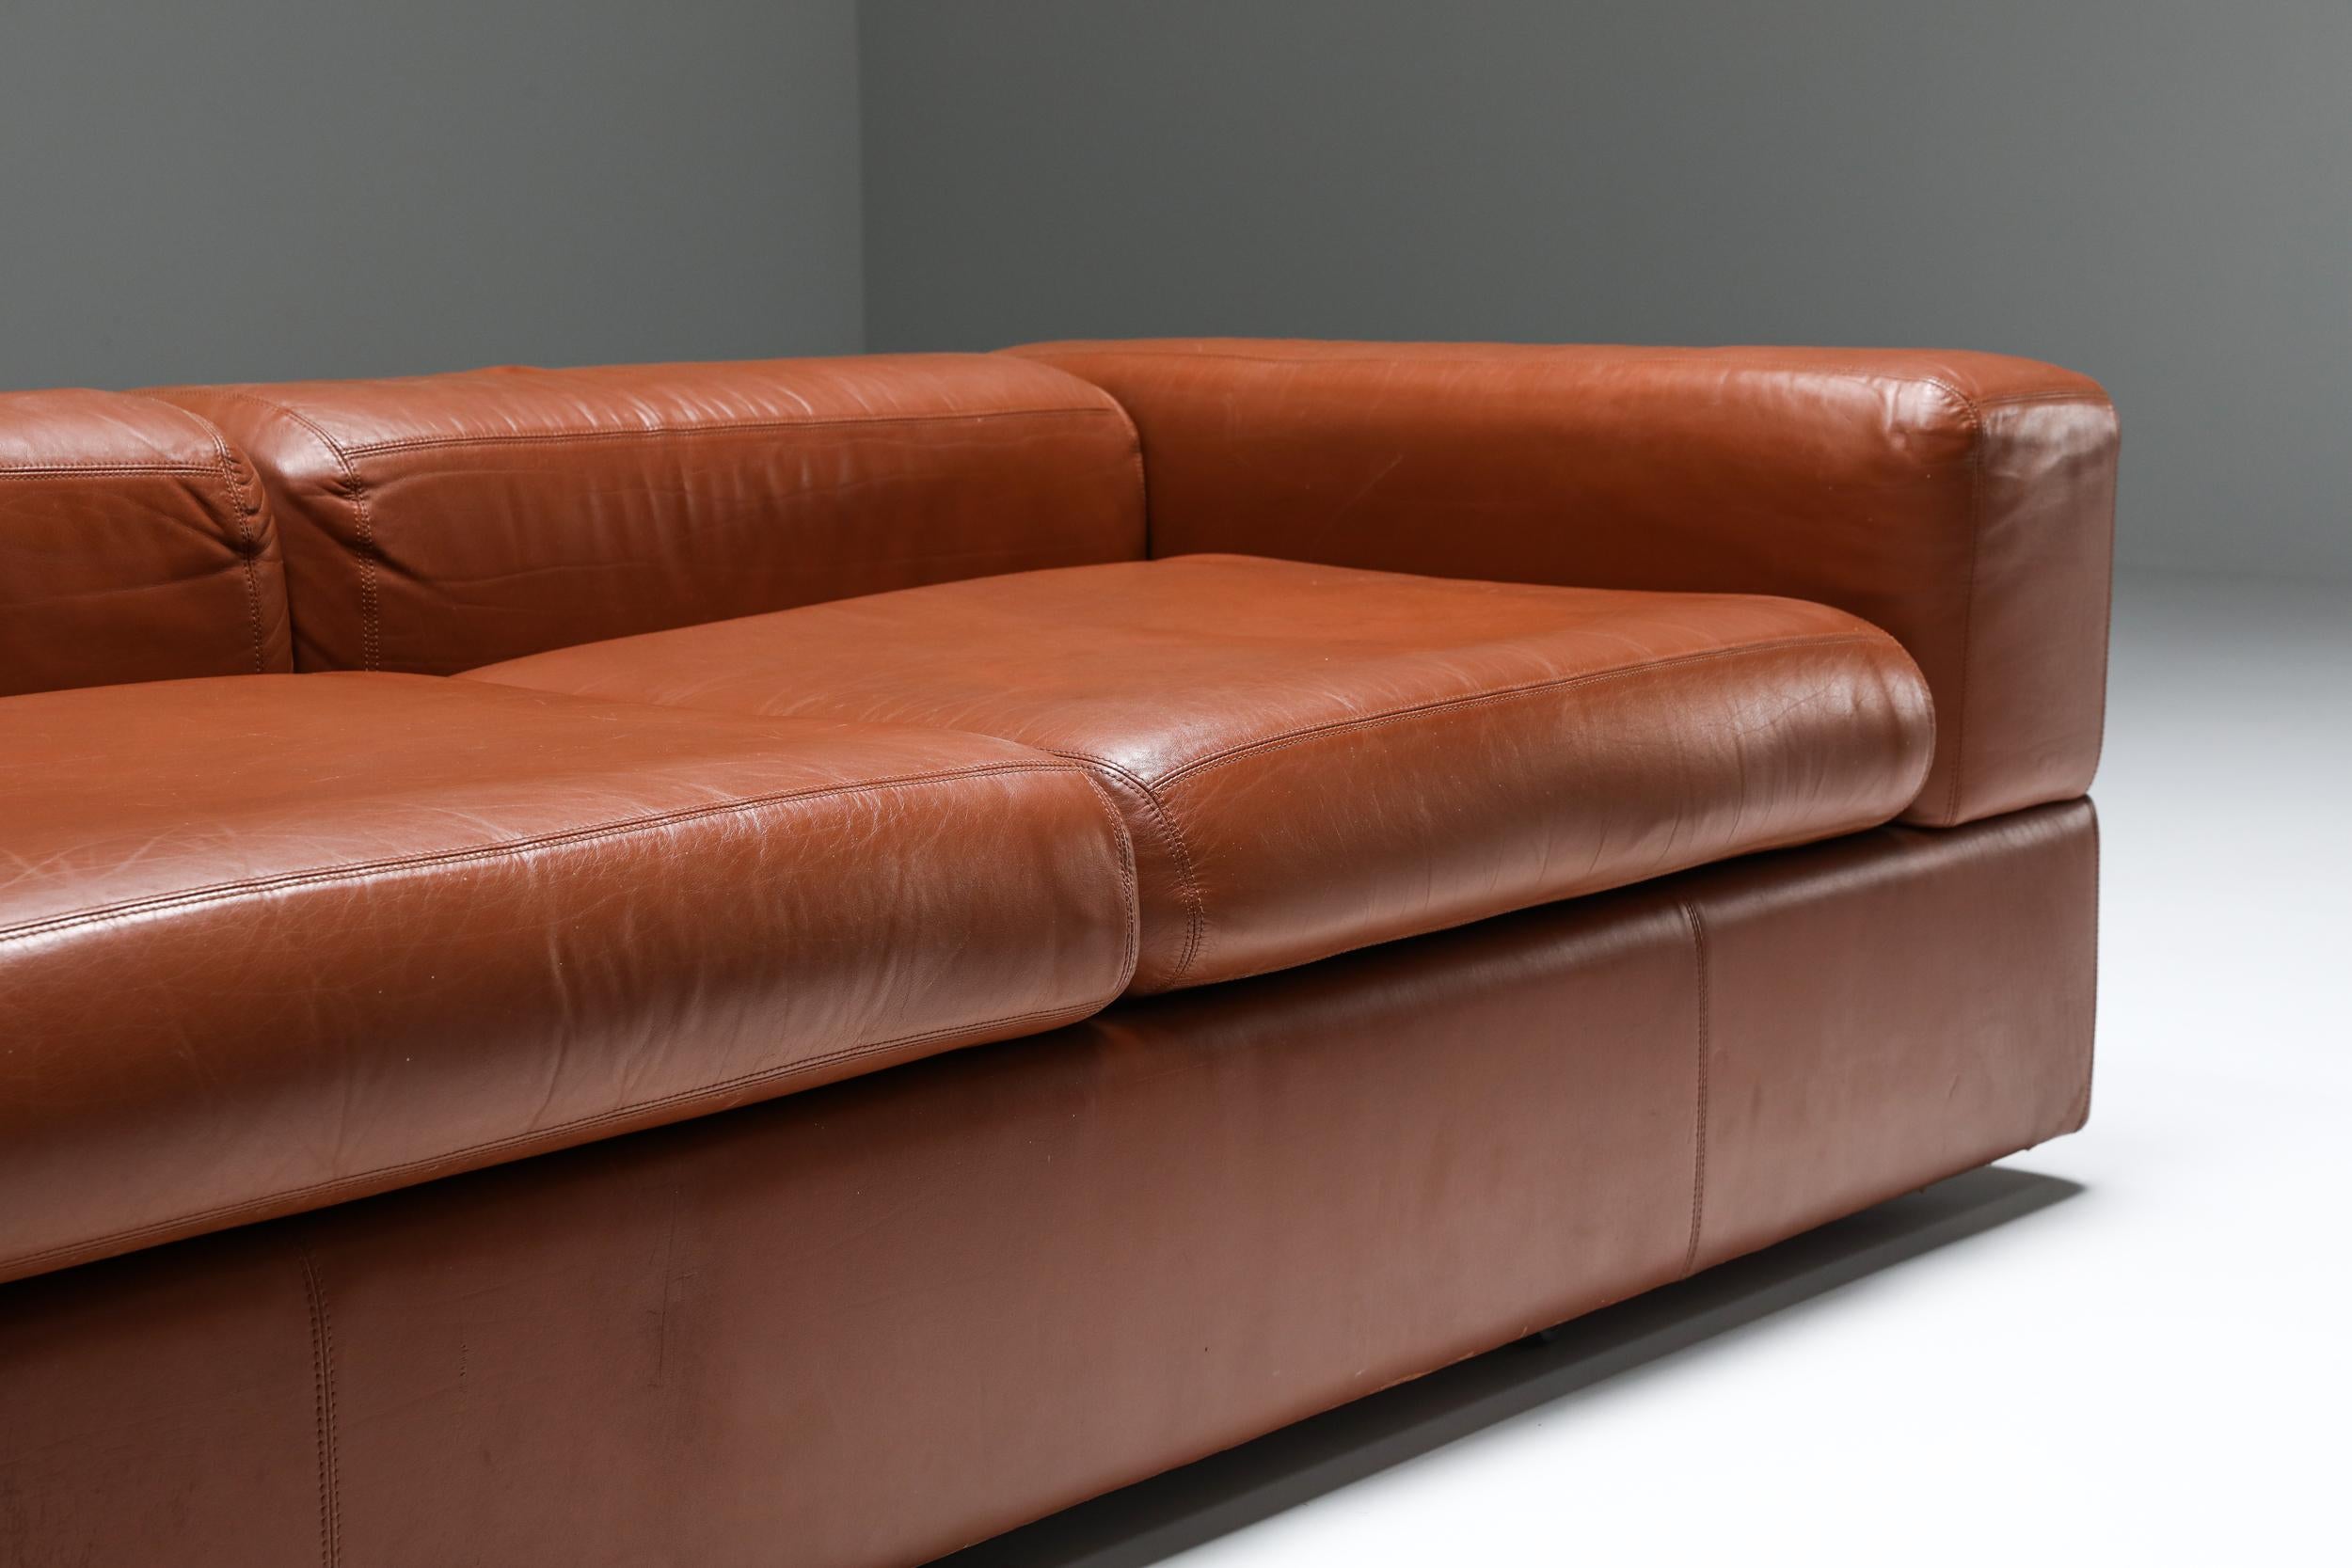 Steel Postmodern Two-Seater Sofa by Tito Agnoli for Cinova in Cognac Leather, 1960's